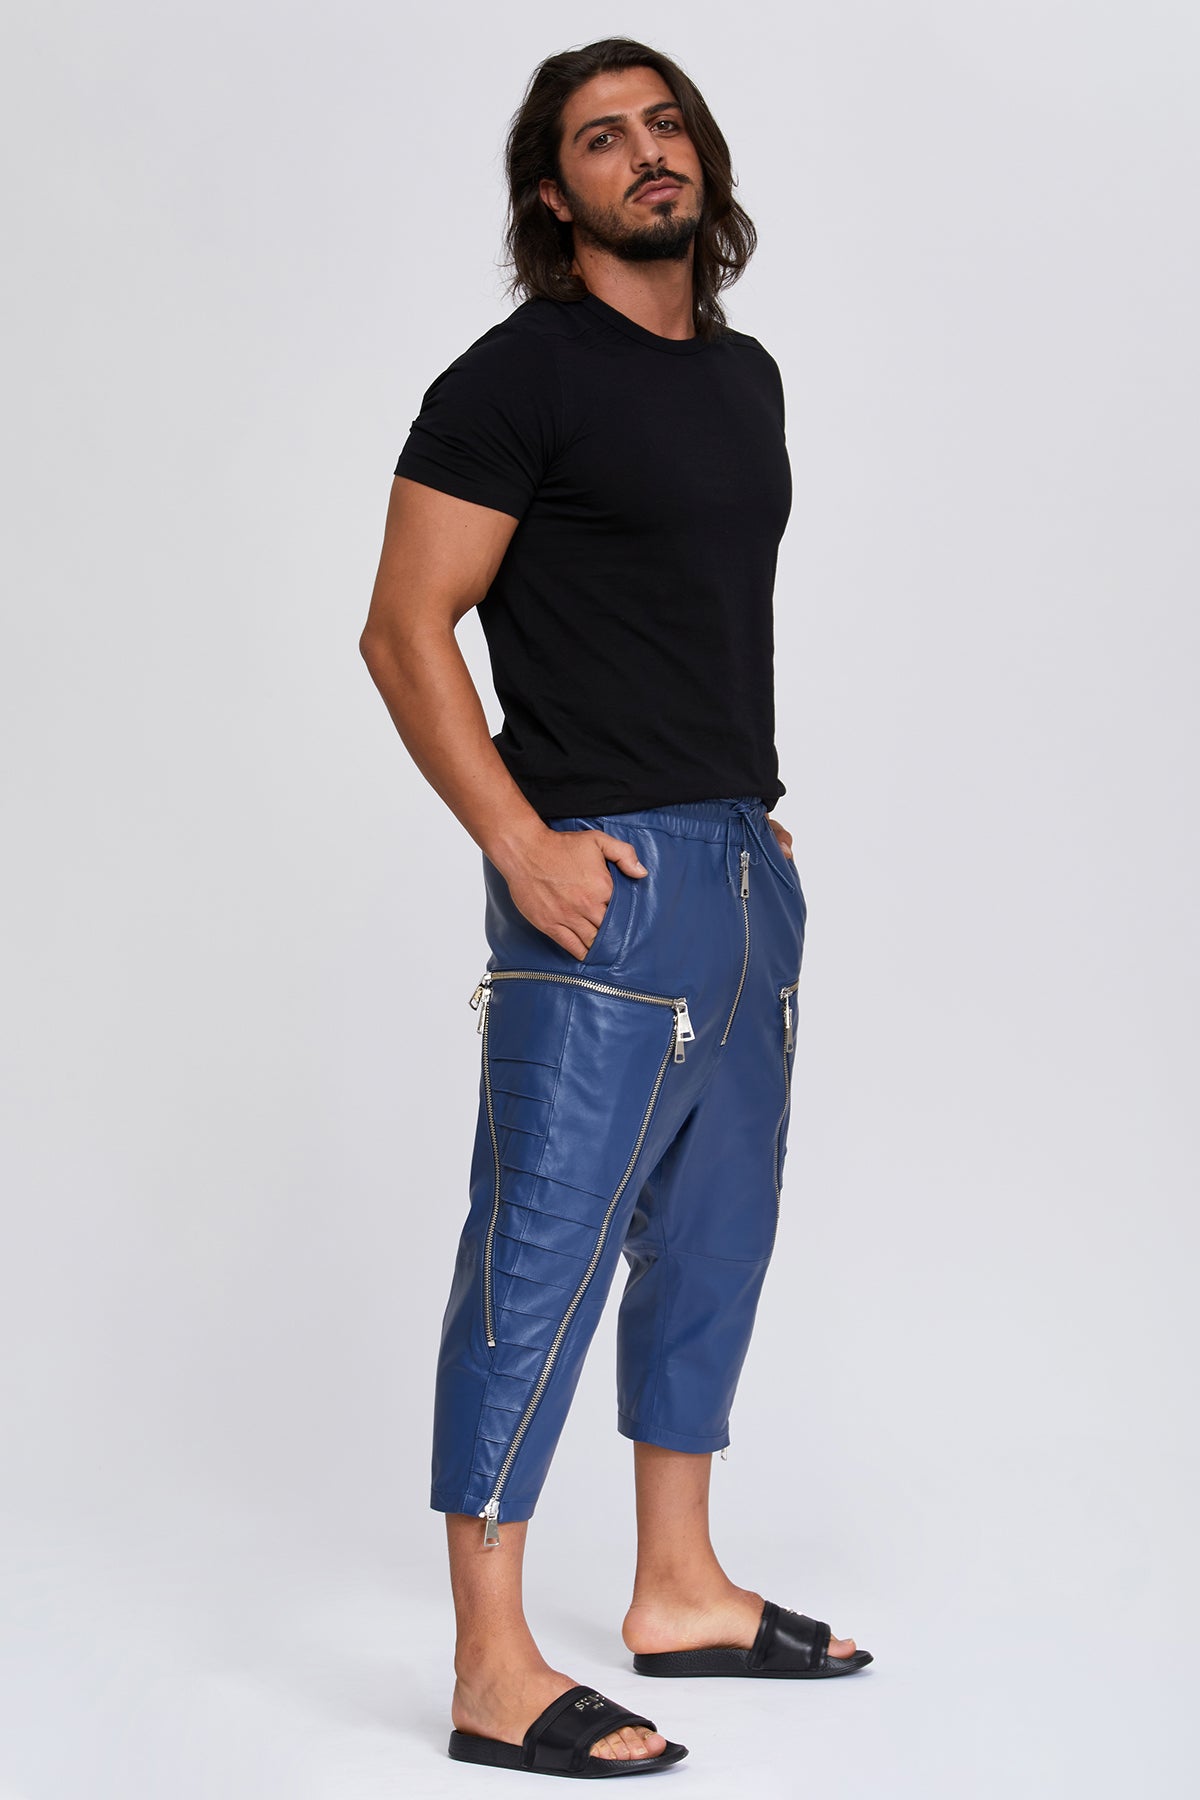 Suvi NYC Men's capri leather pants. Real Turkish leather. Lambskin. Soft. luxurious, high-end pants